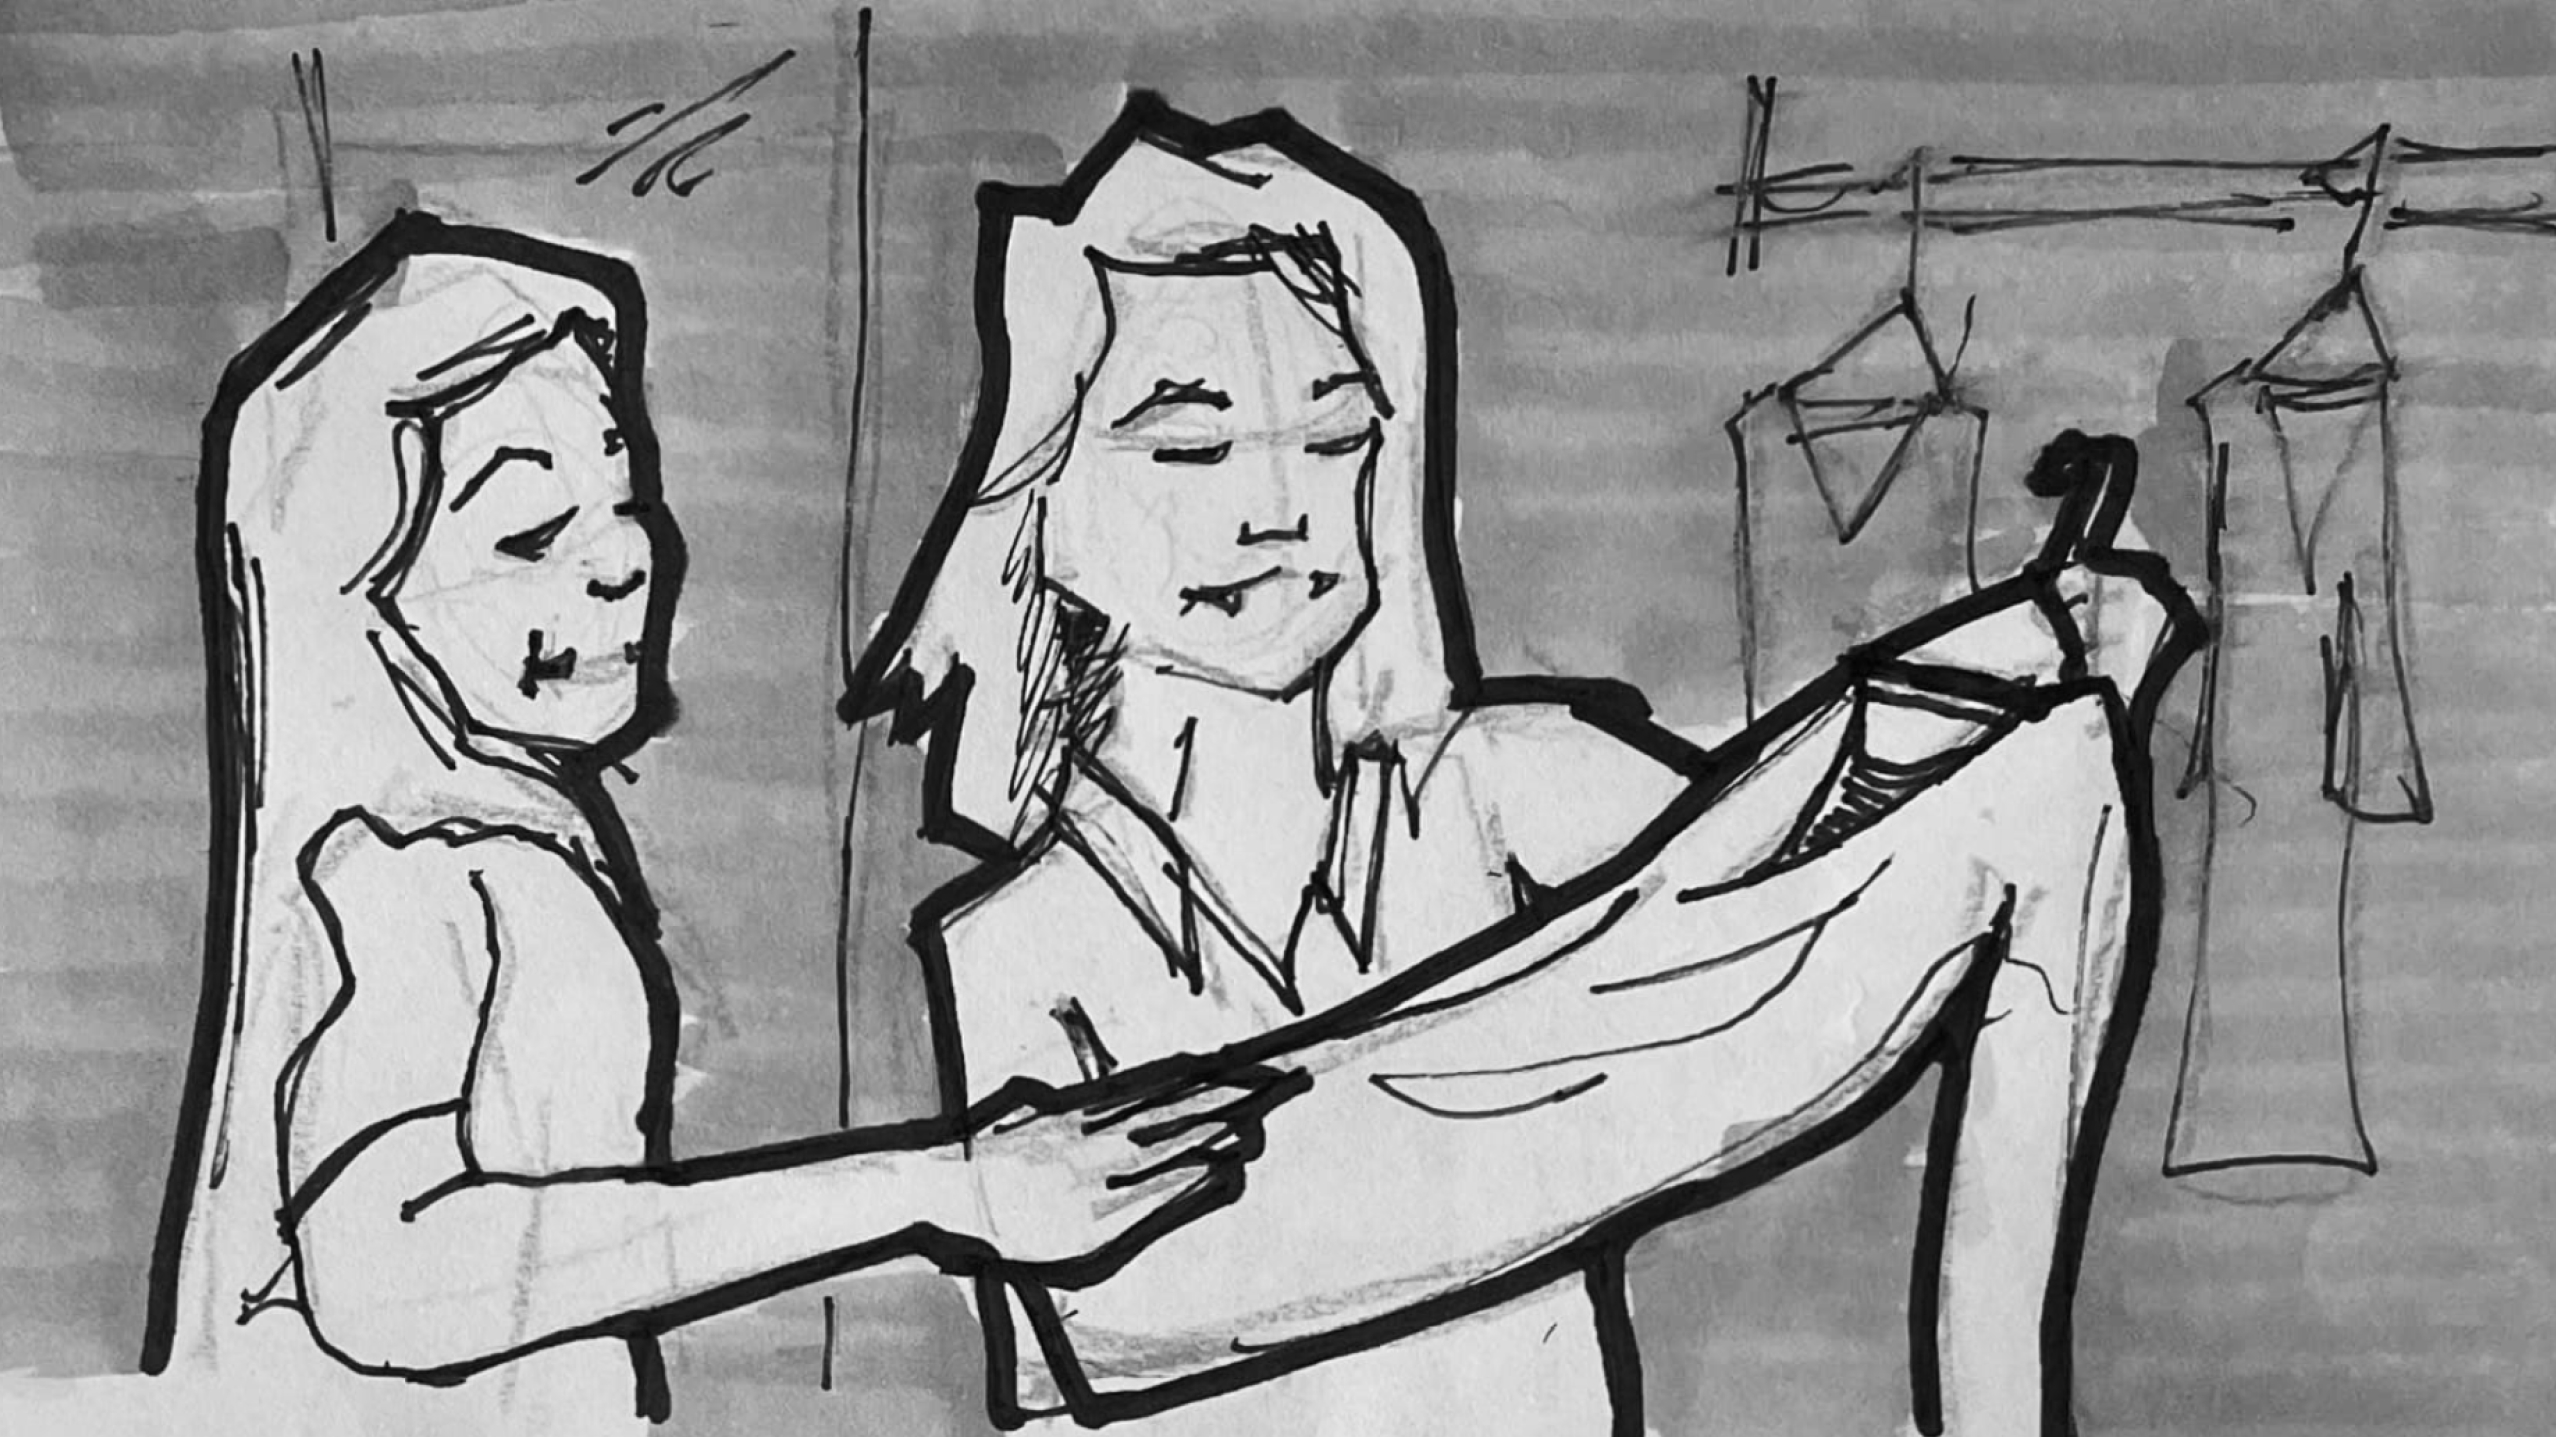 Storyboard sketch of Danielle with clothes